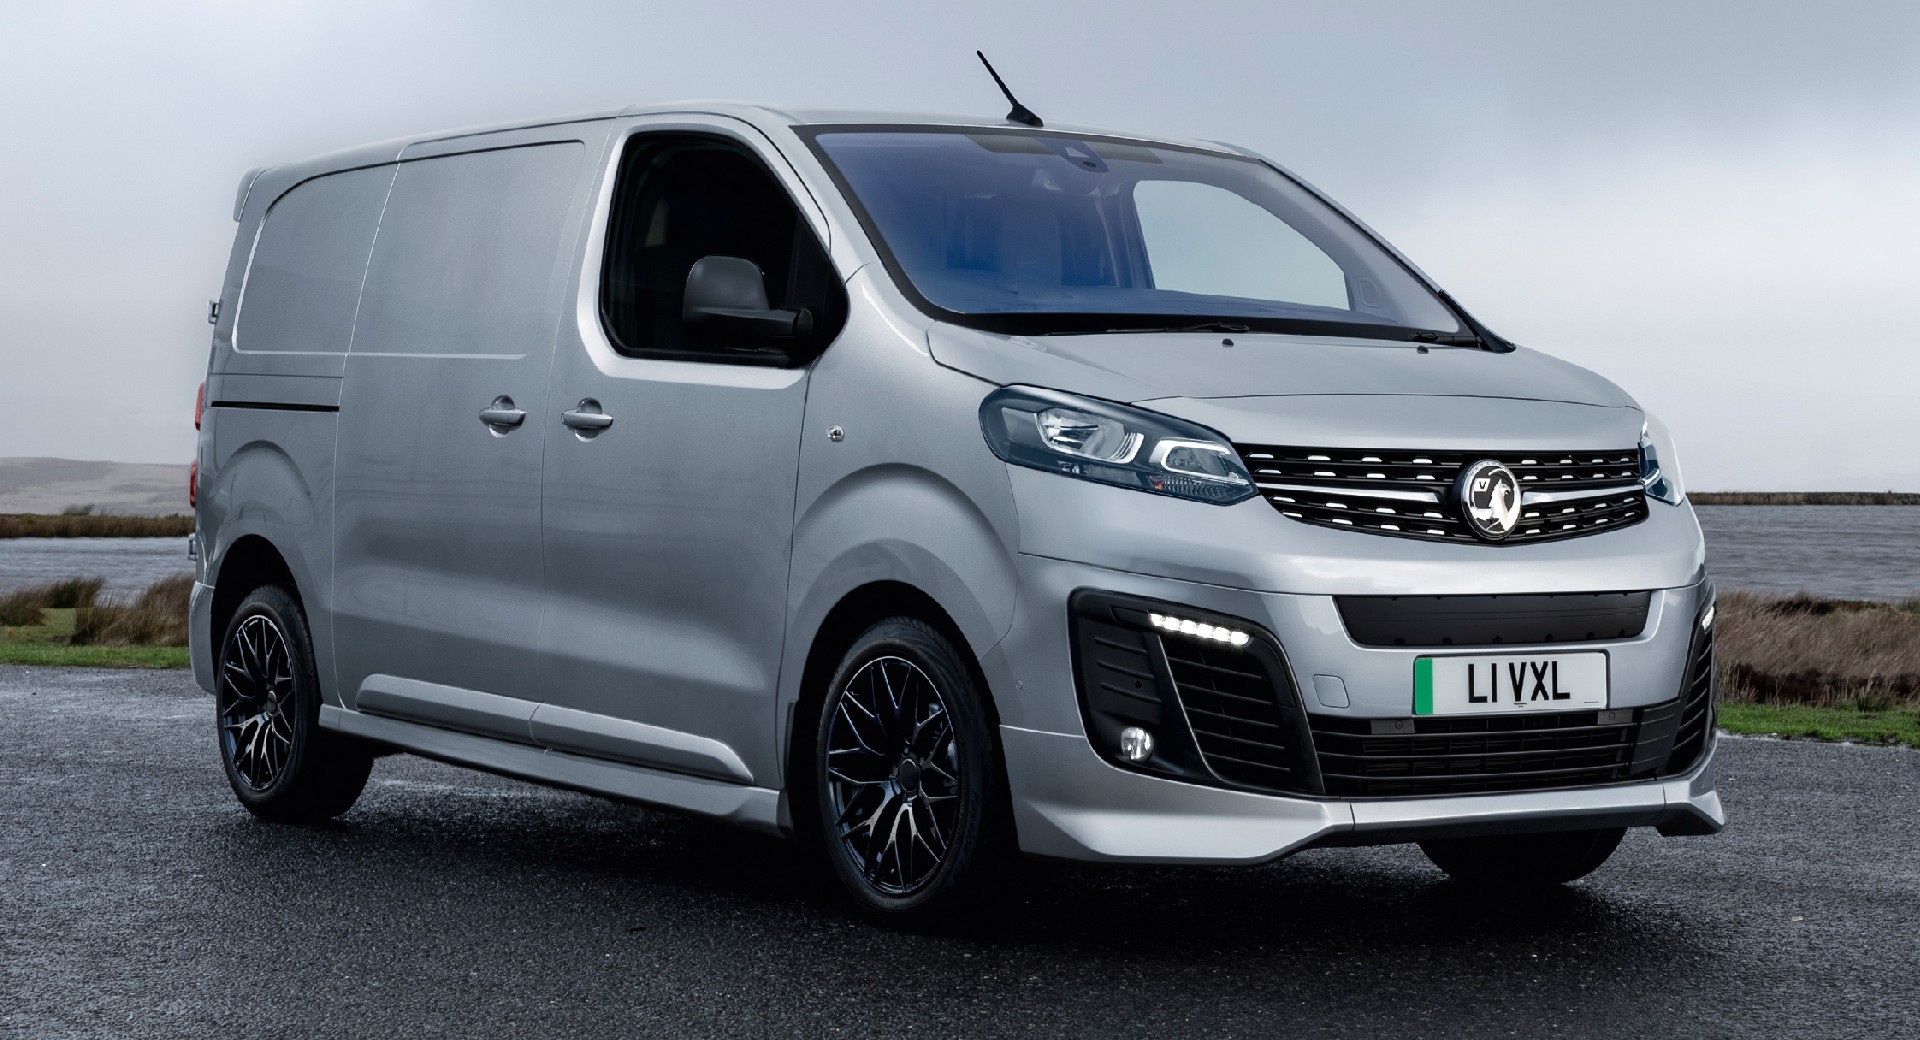 Prices are set: New Opel Vivaro Combi+ and Tourer large vans, Opel